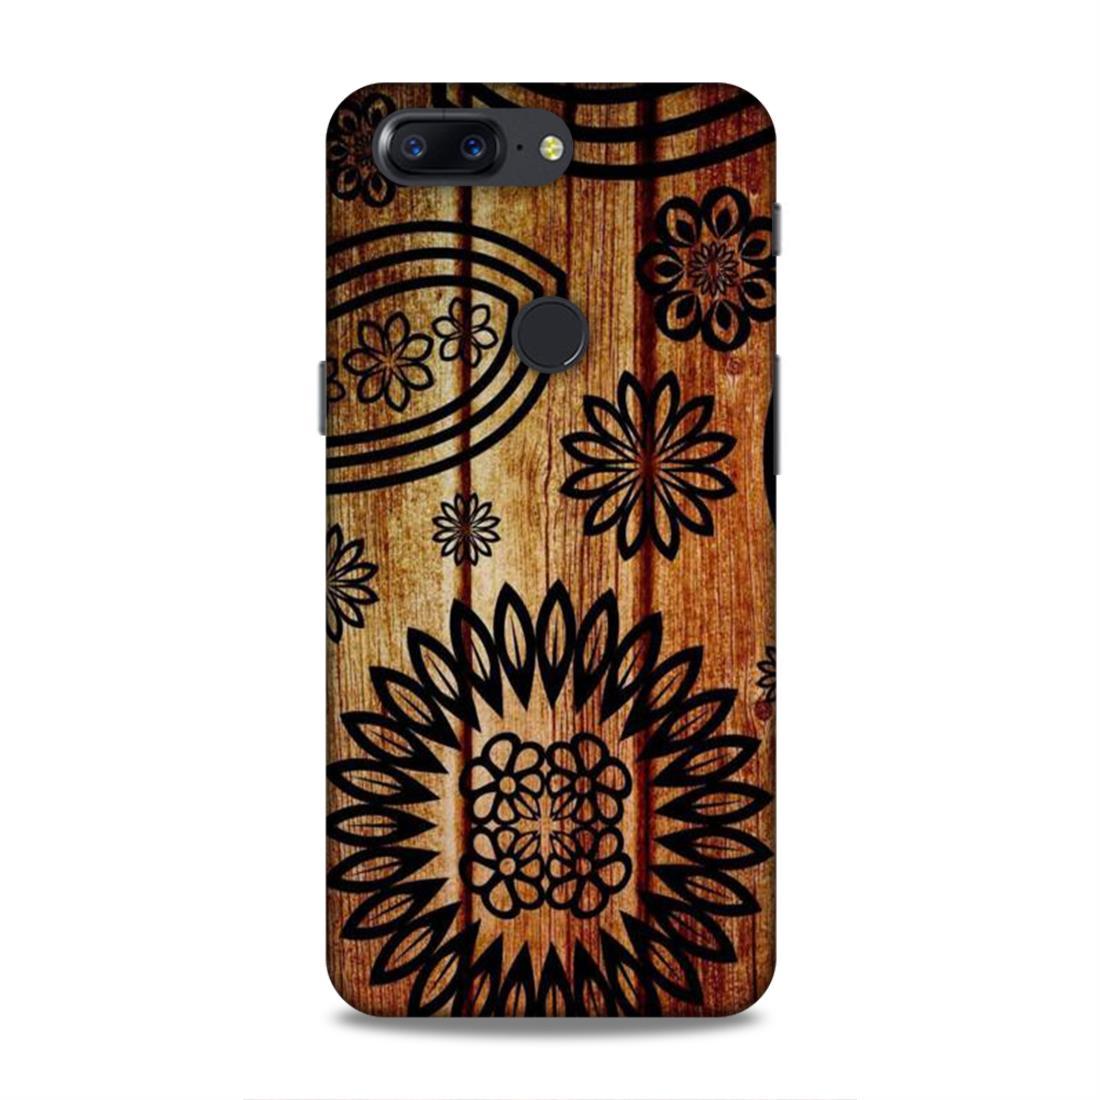 Wooden Look Pattern OnePlus 5T Mobile Case Cover